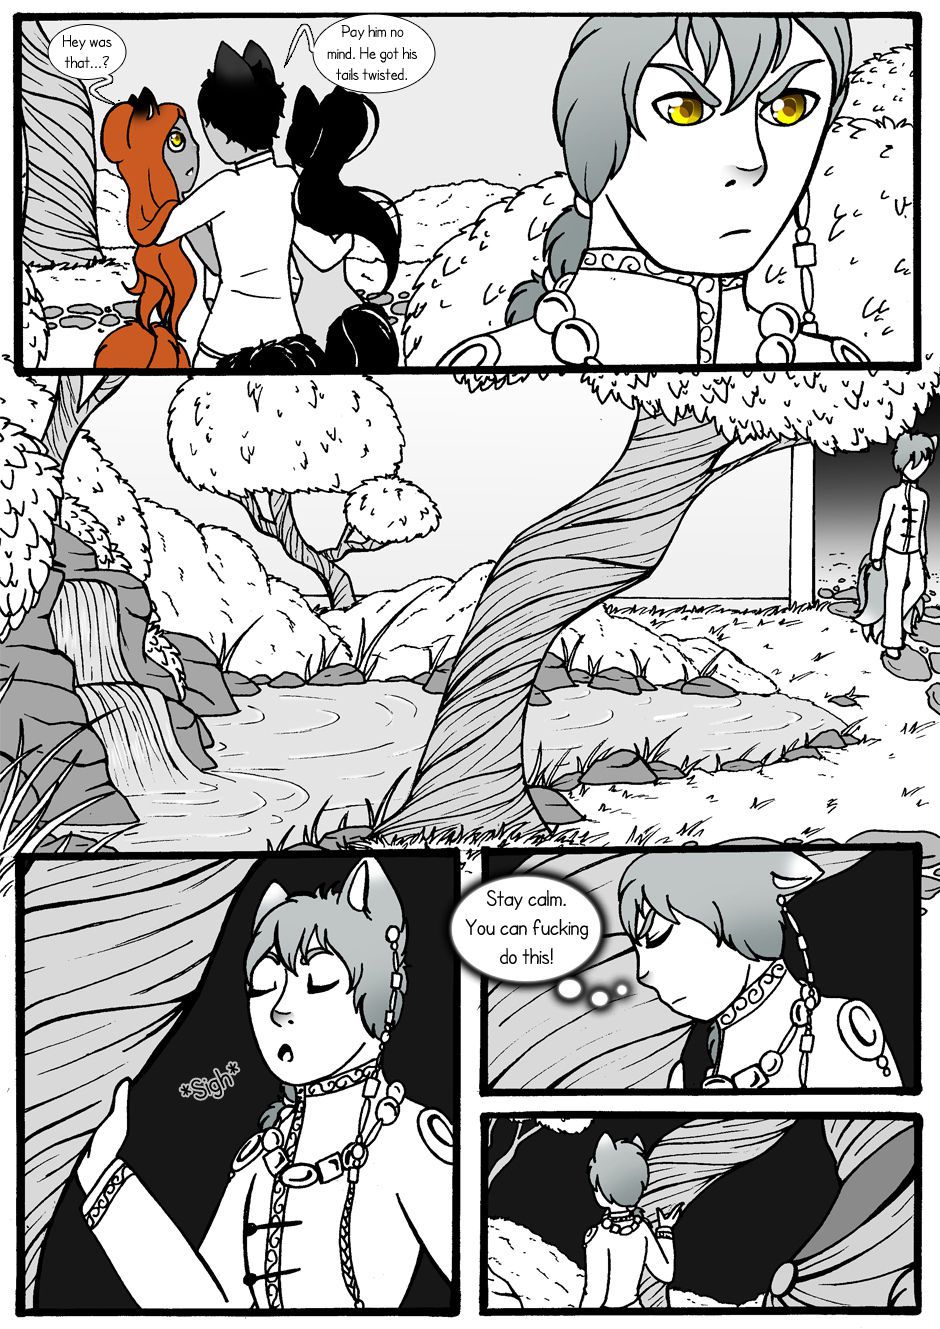 [Jeny-jen94]Between Kings and Queens[ongoing] 30